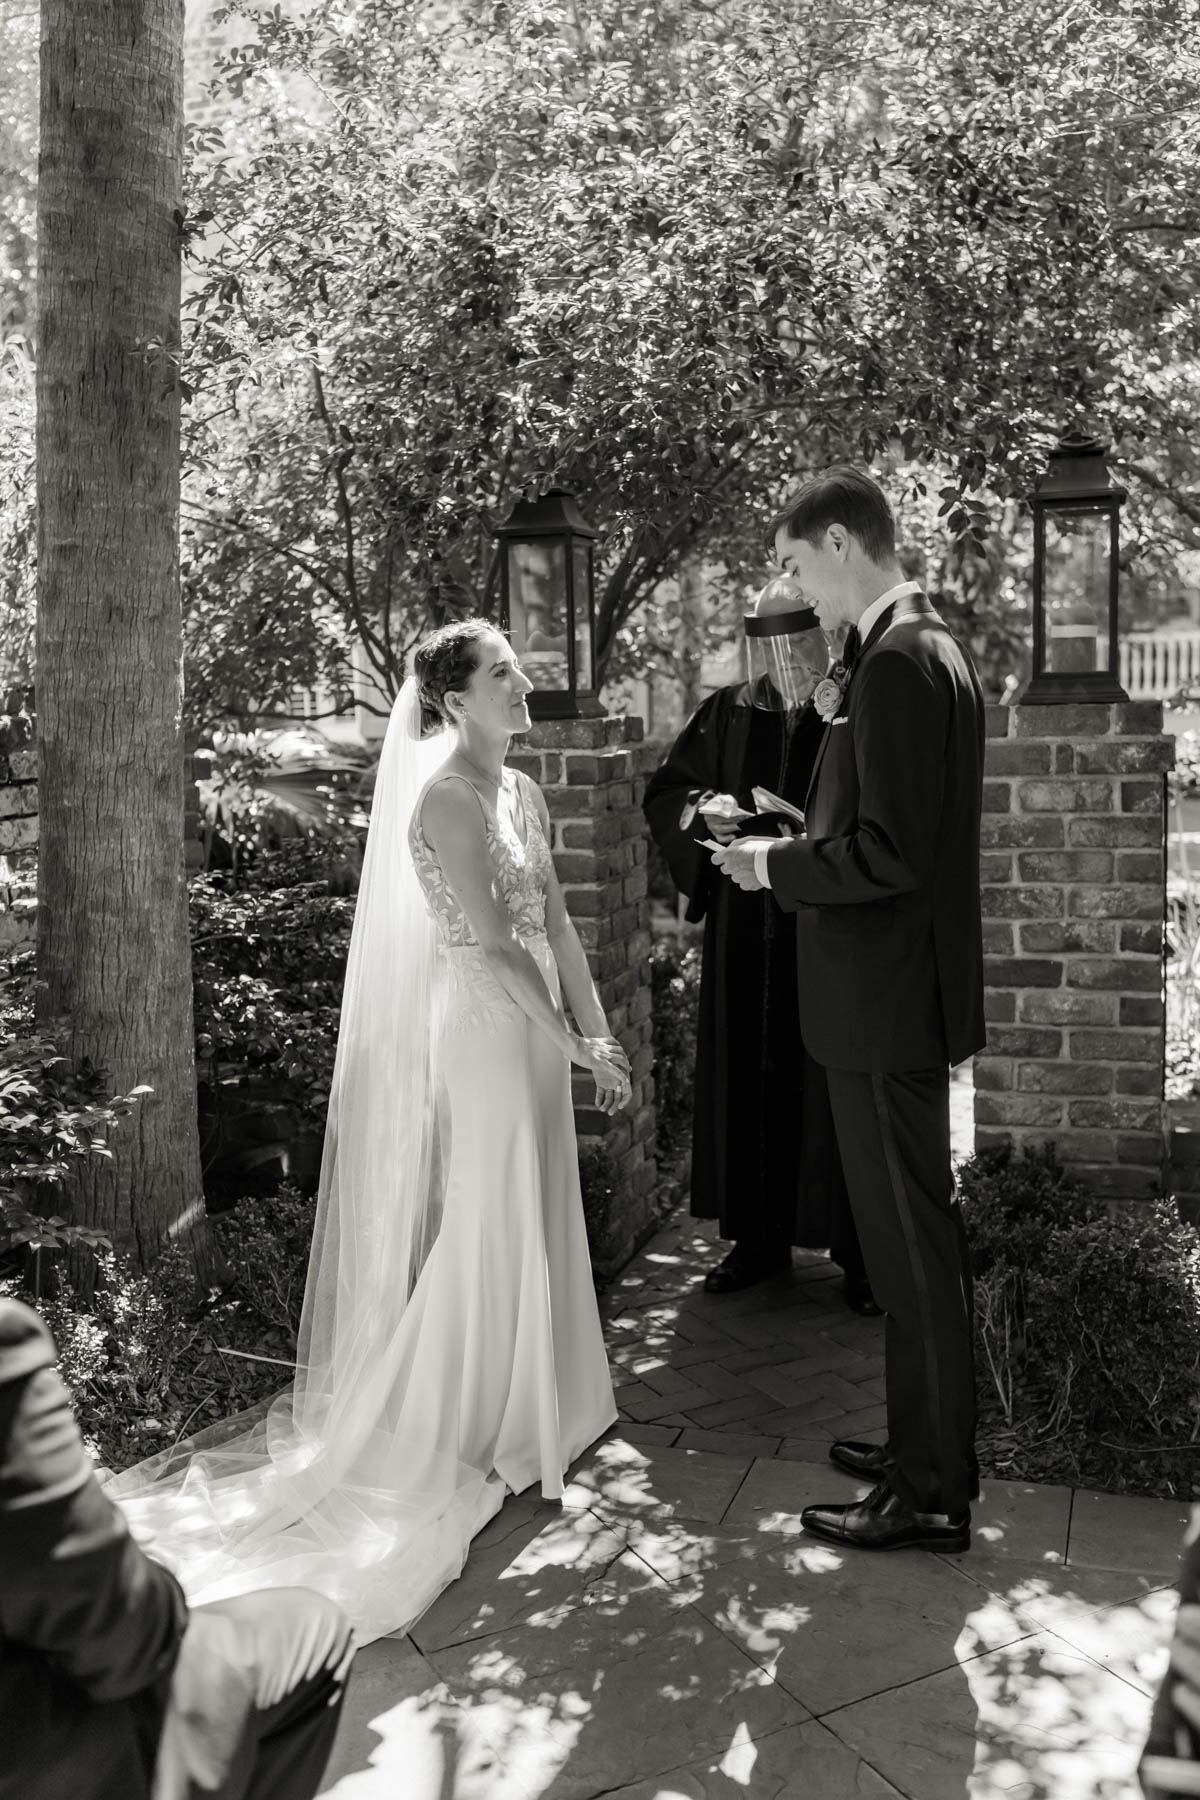 A groom reads his vows to his bride during their wedding ceremony